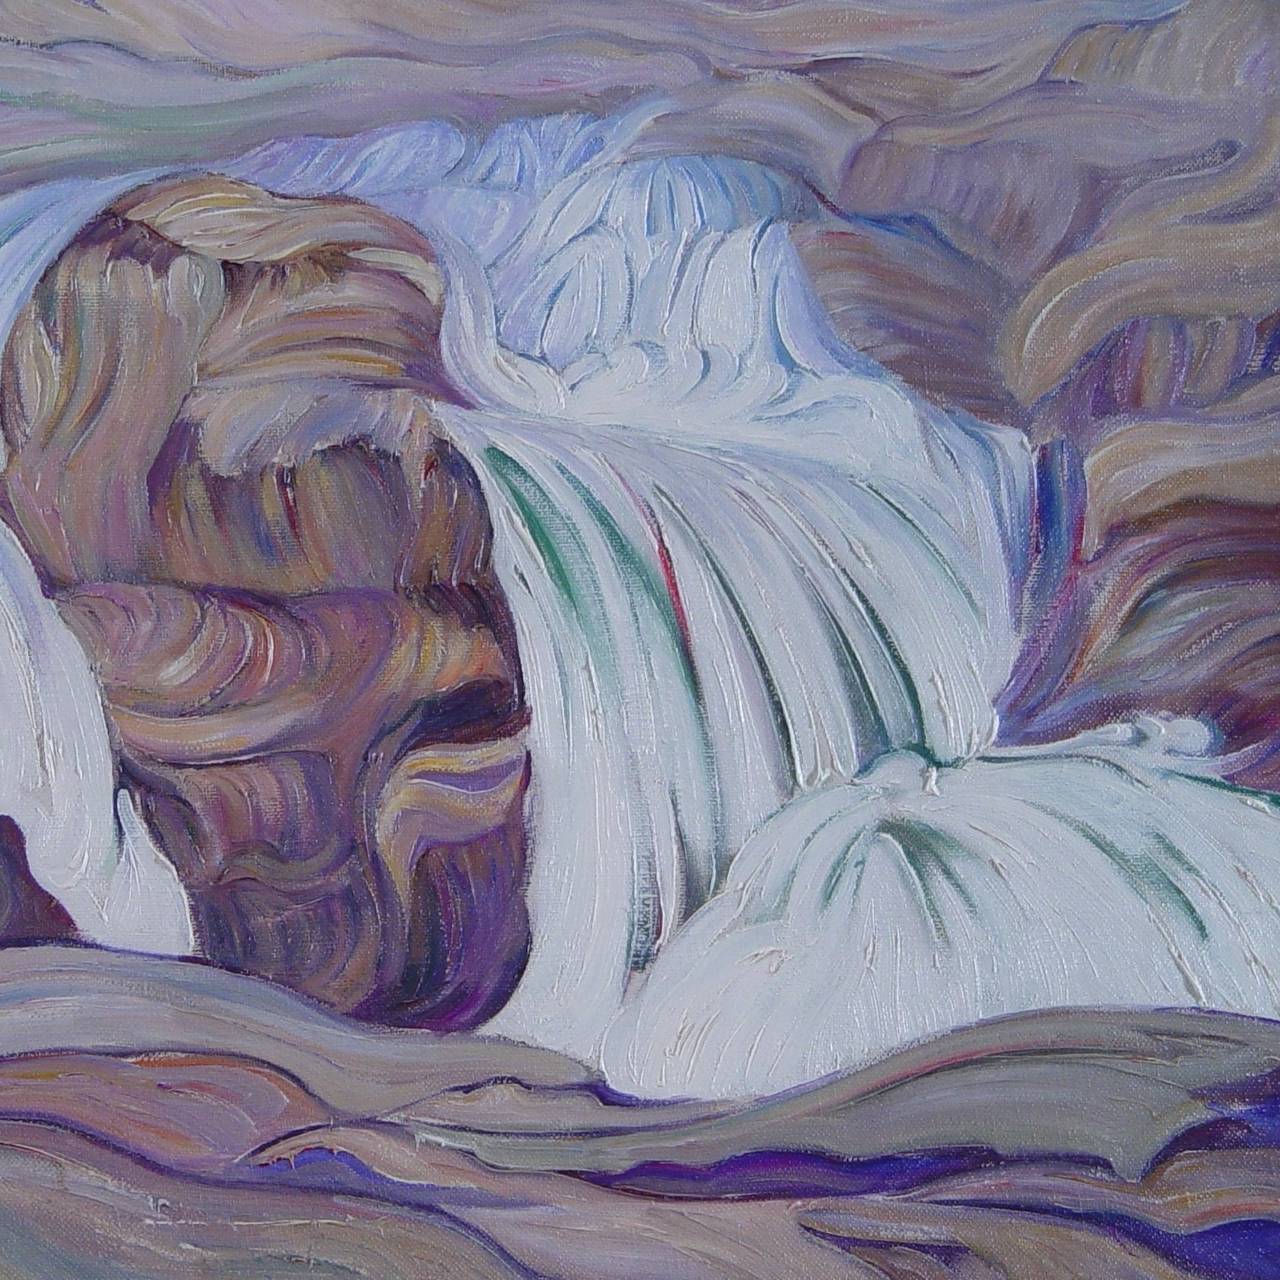 Waterfall (Woodstock, New York) - American Modern Painting by Grace Hill Turnbull